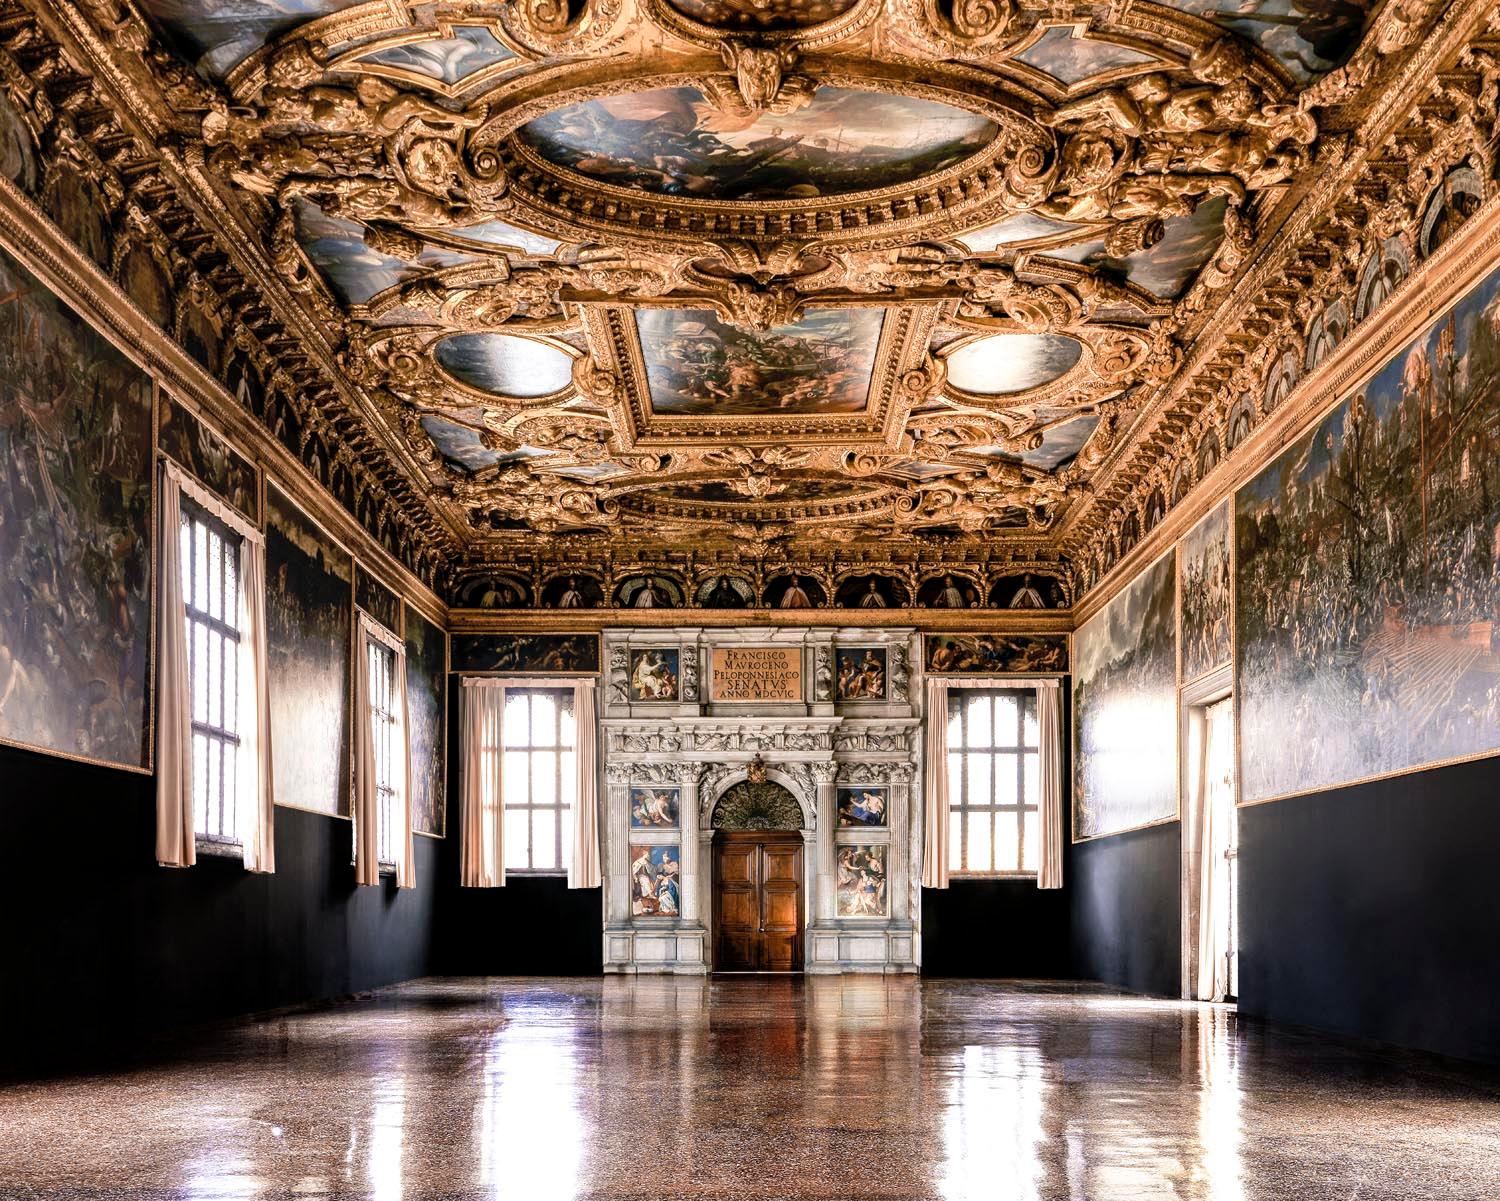 Massimo Listri
Palazzo Ducale III, Venezia
2022
C print Signed, dated, and numbered on verso label   

39.5 x 47.5 inches (100 x 120 cm) edition of 5 - $12,500
47.5 x 59 inches (120 x 150 cm) edition of 5 - $14,500
71 x 88.5 inches (180 x 225